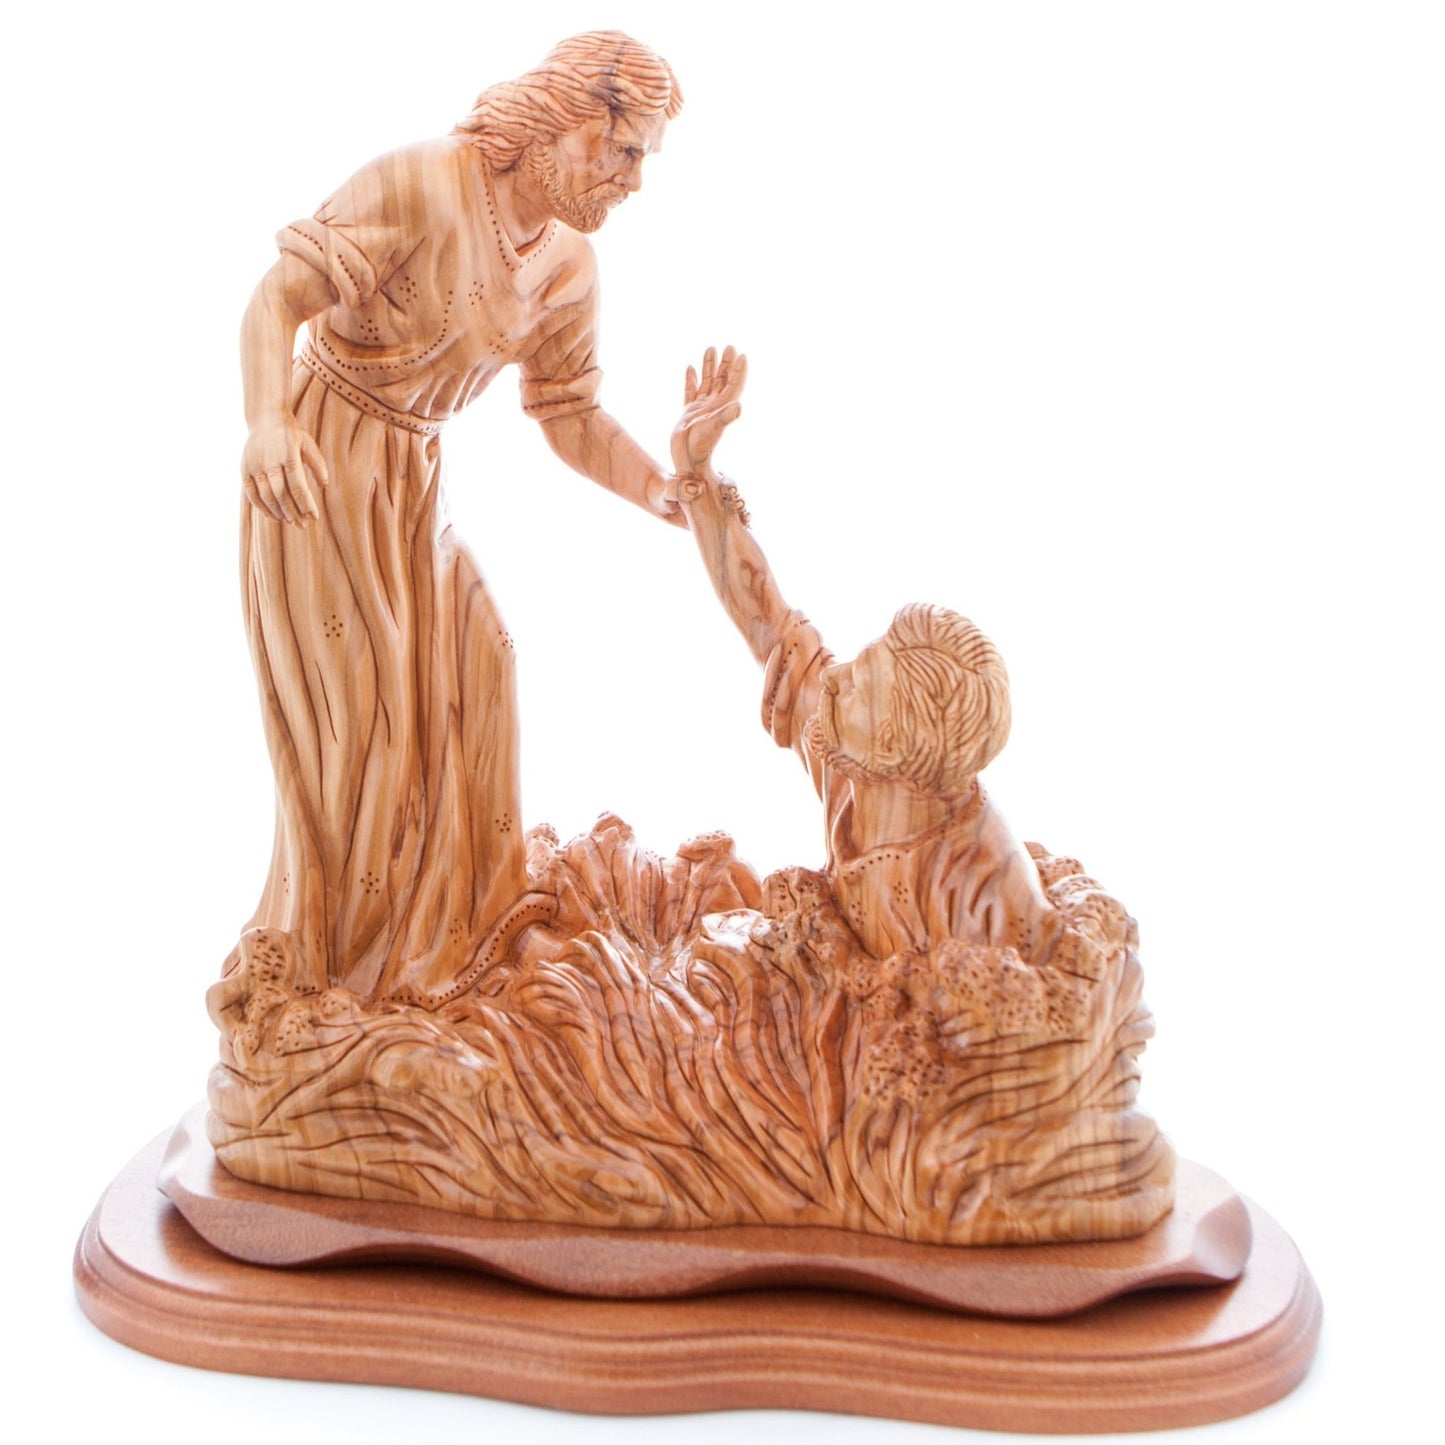 Jesus Christ Walks on Water Masterpiece, 15.4" Carved Sculpture from the Holy Land